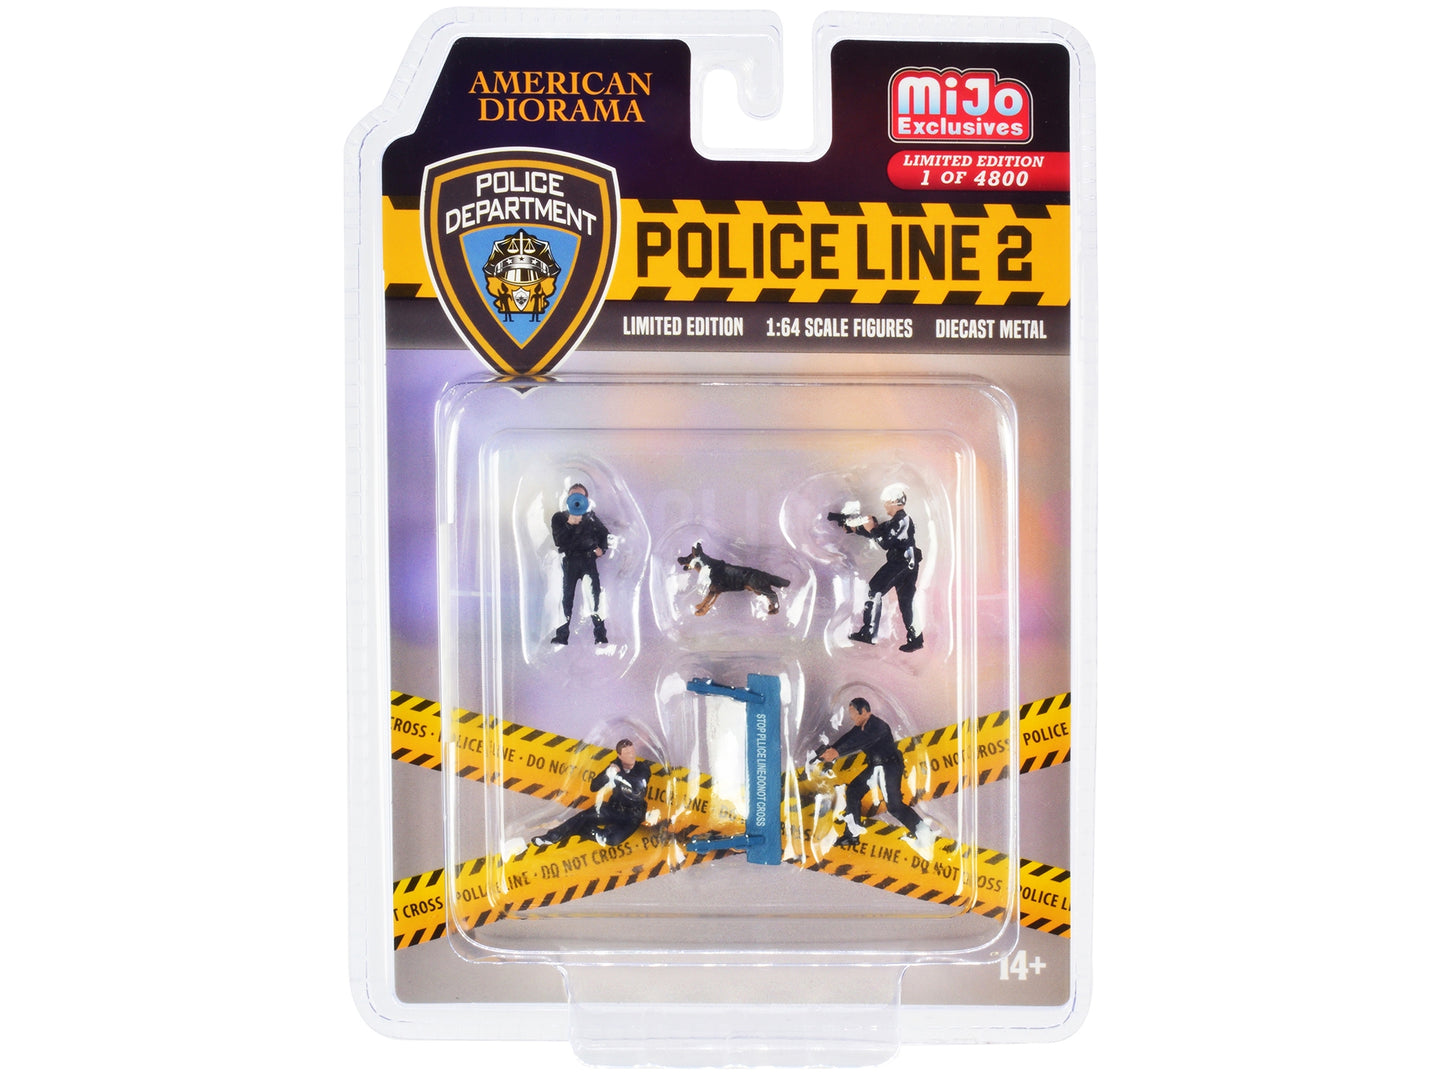 "Police Line 2" 6 piece Diecast Set (4 Police Figures 1 Dog Figure and 1 Accessory) Limited Edition to 4800 pieces Worldwide for 1/64 Scale Models by American Diorama